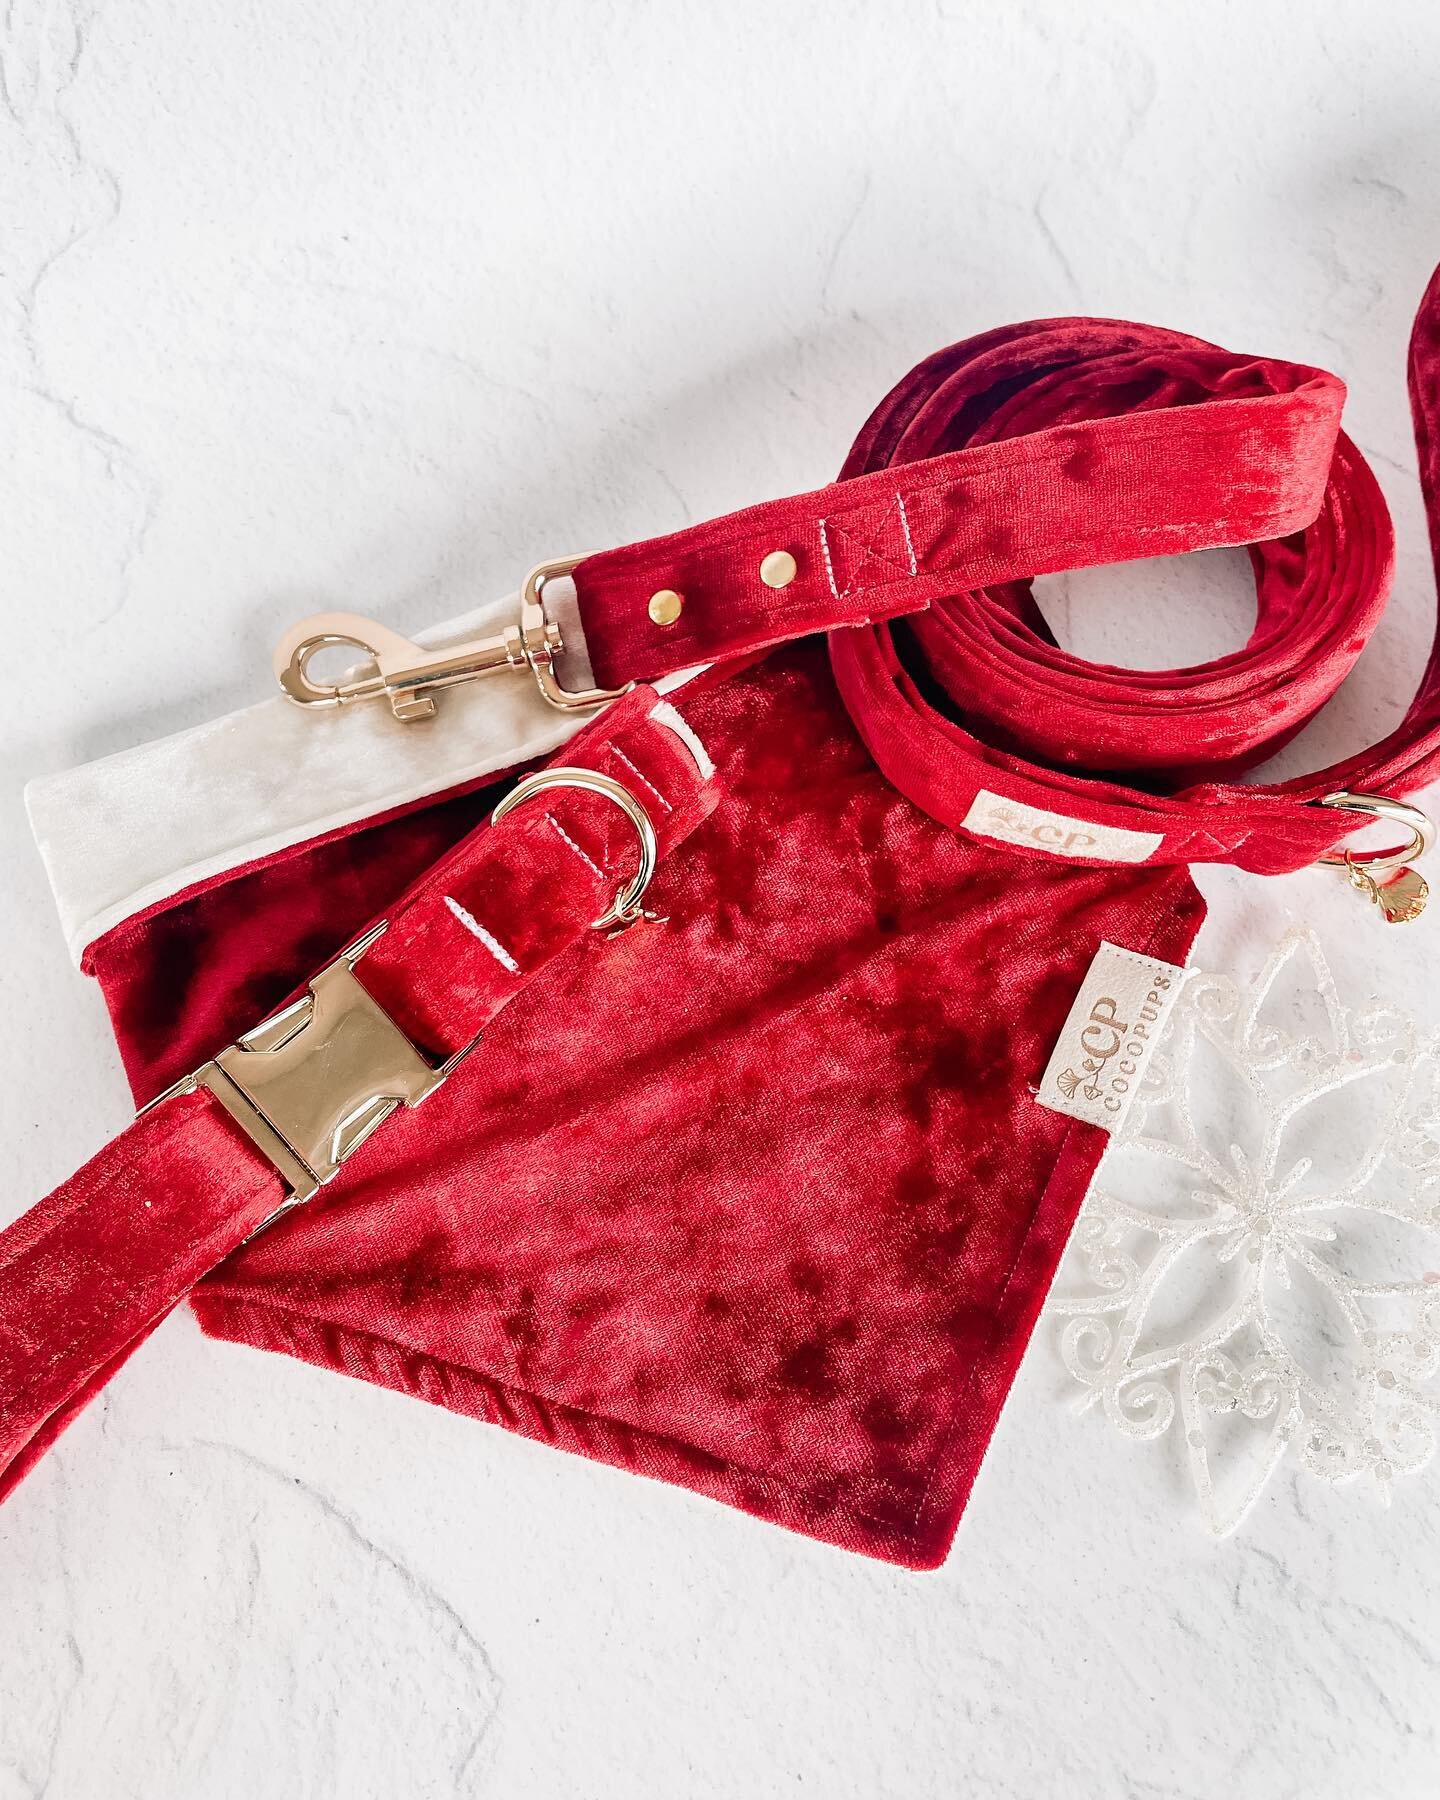 💌🎅🏼 All I want for Christmas &hellip;

Our best selling velvet print last year is back! Shop our Spiced Sangria collars and leashes, or our new Santa Paws reversible bandana ❤️